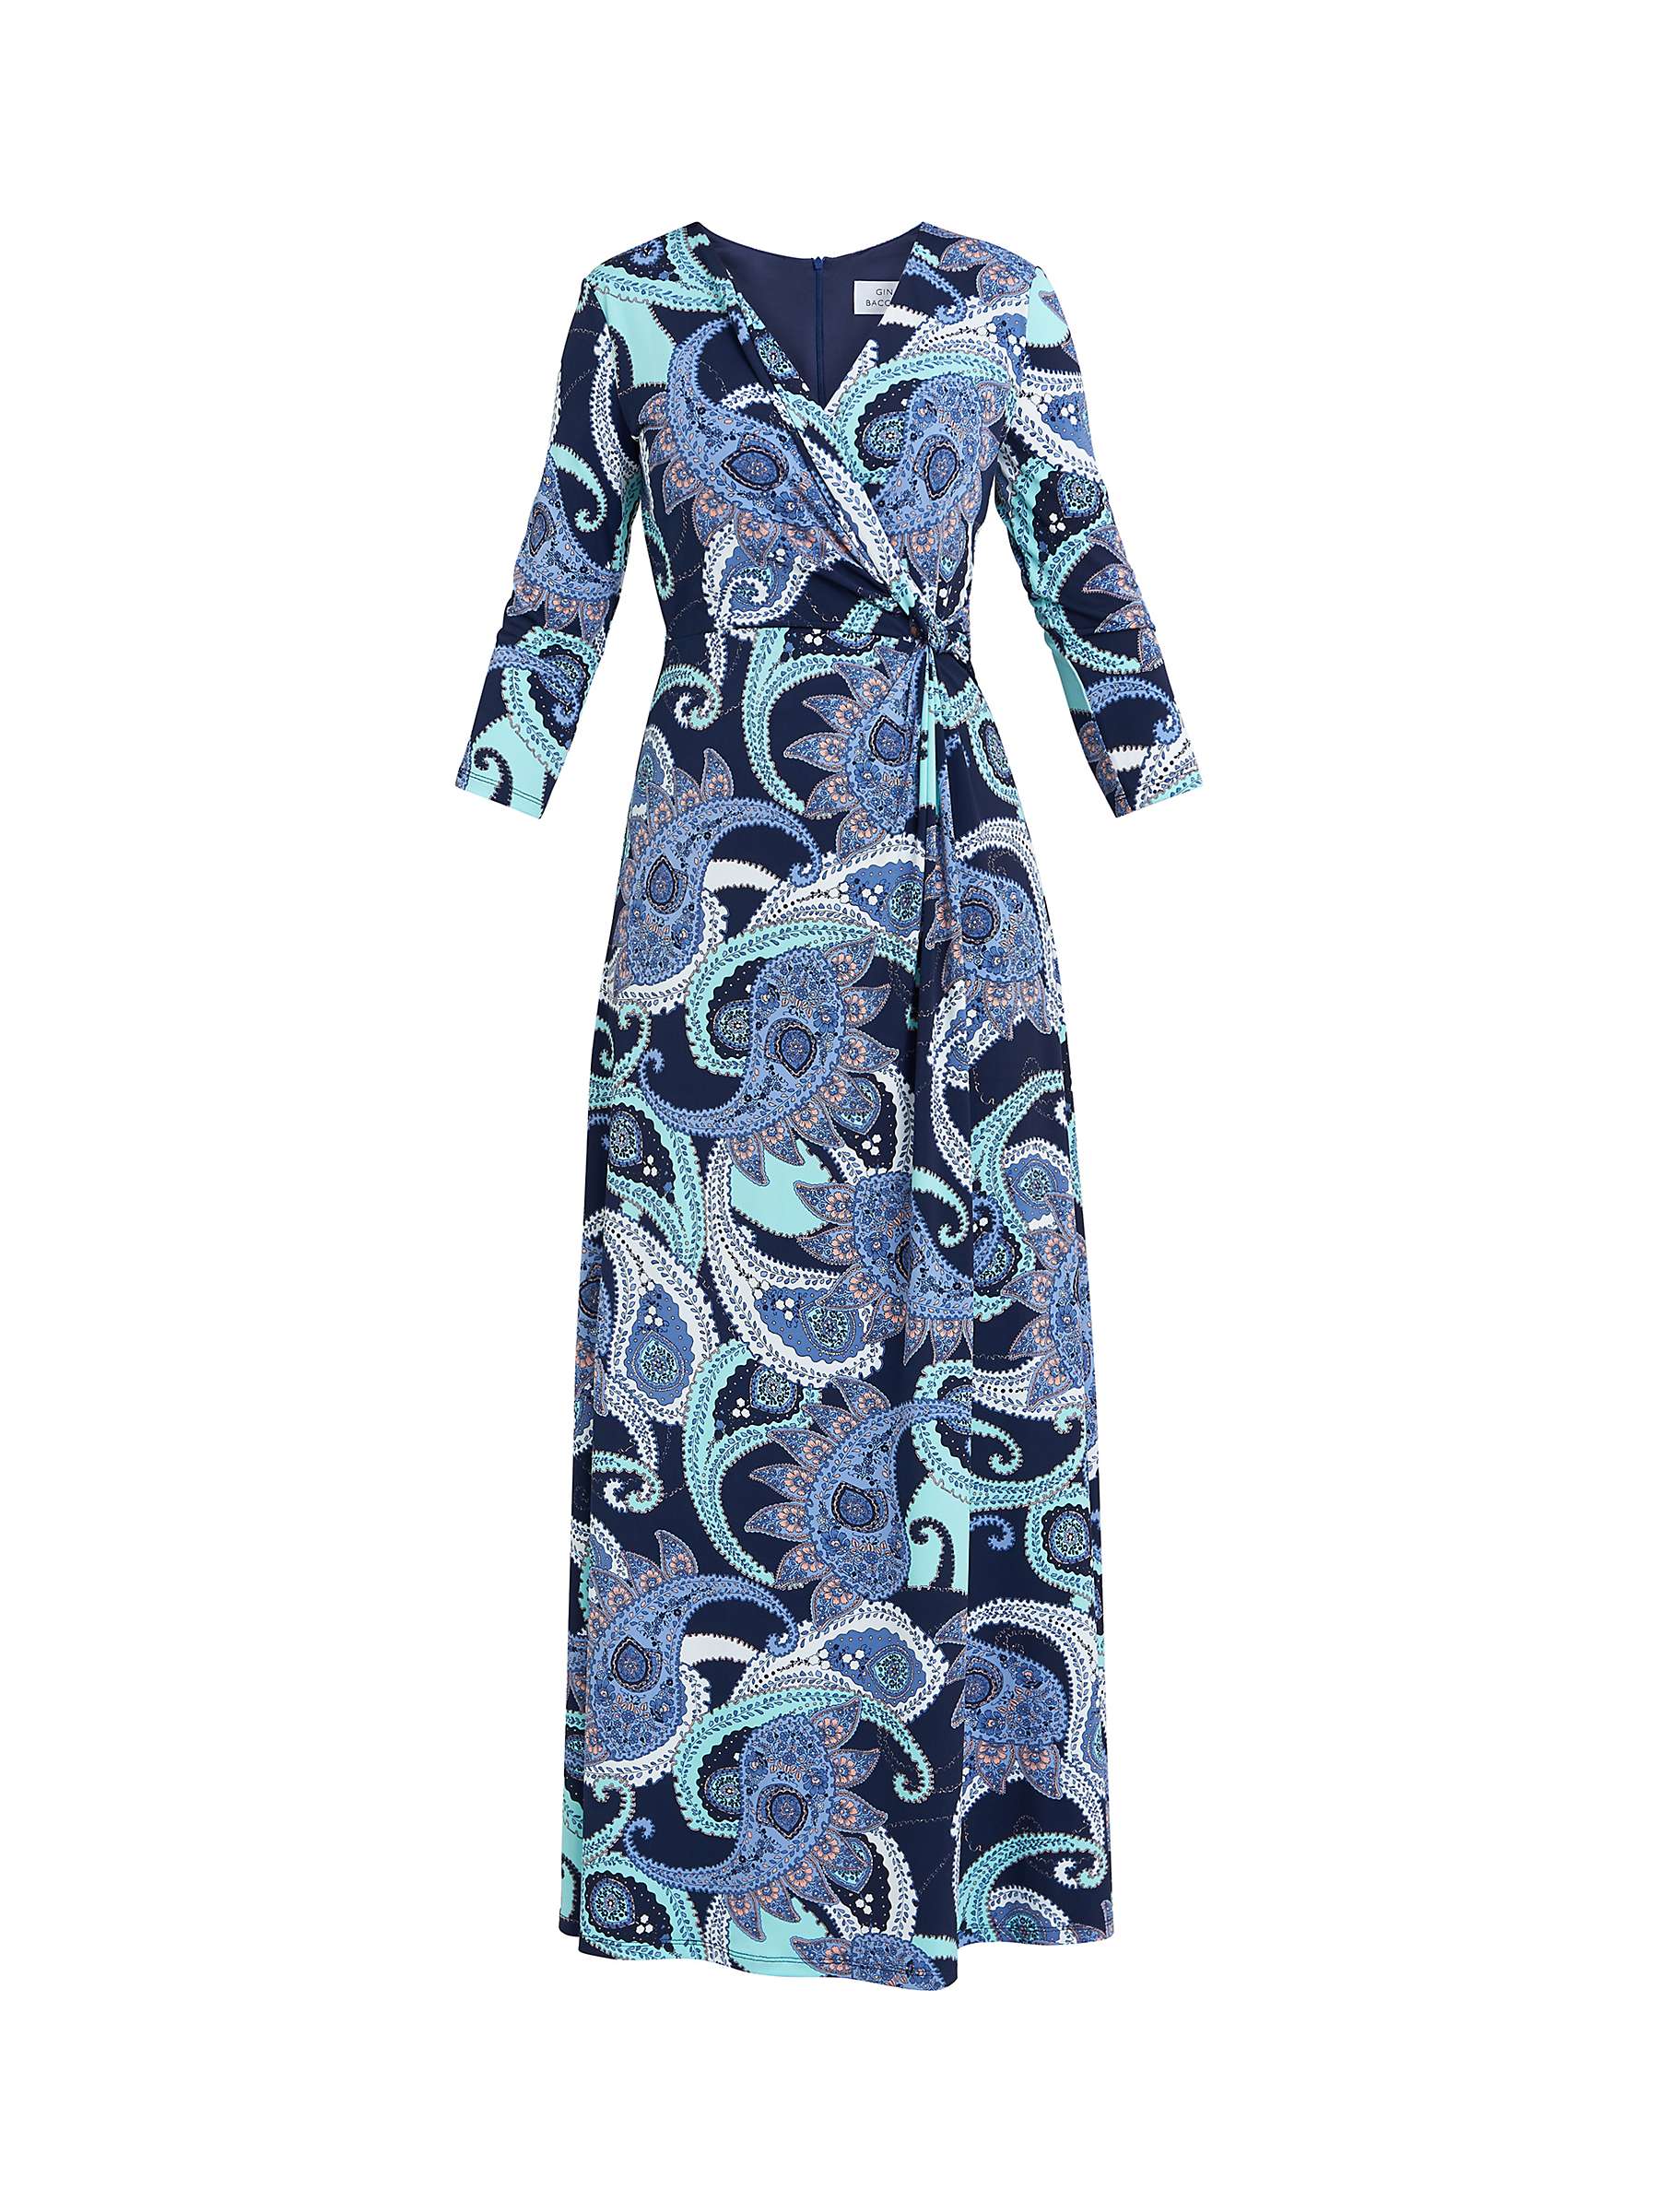 Buy Gina Bacconi Danielle Jersey Wrap Maxi Dress, Navy/Green Online at johnlewis.com